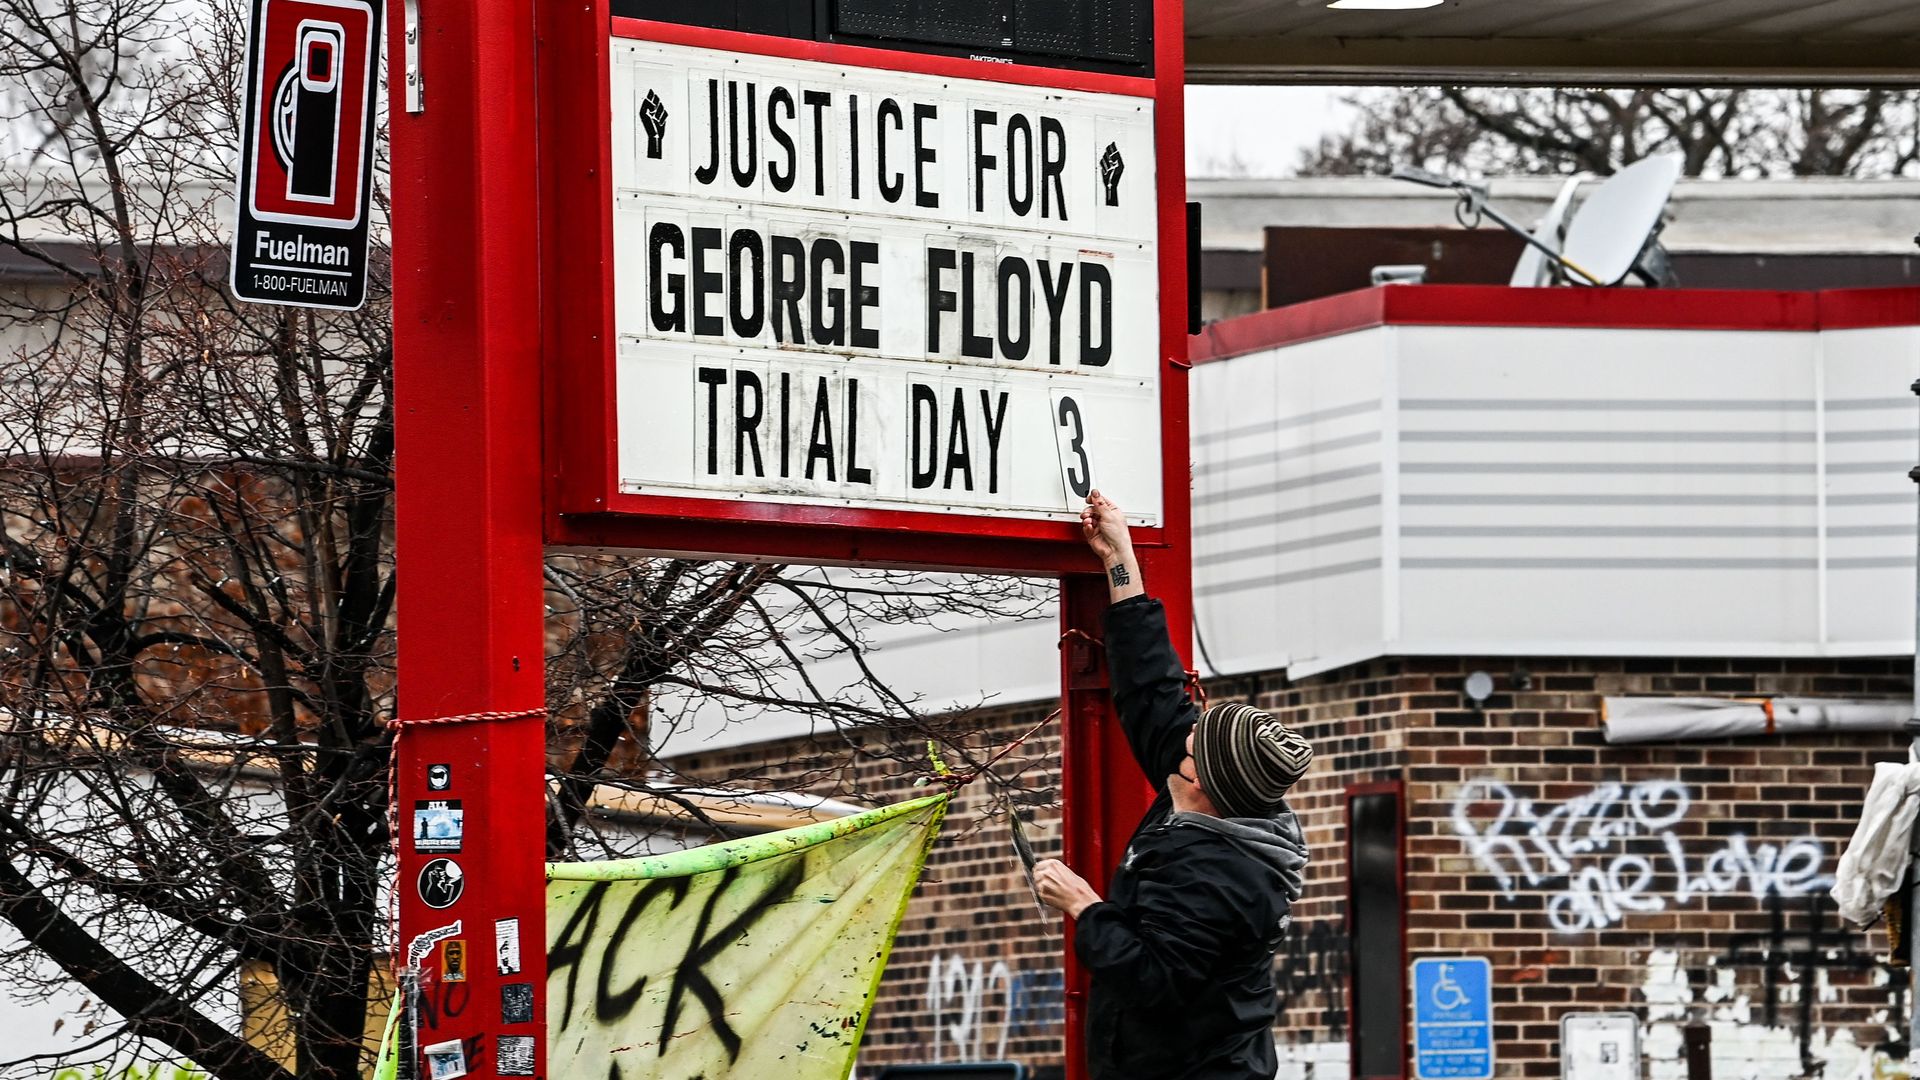 A person puts up a sign saying Justice for George Floyd Trial Day 3